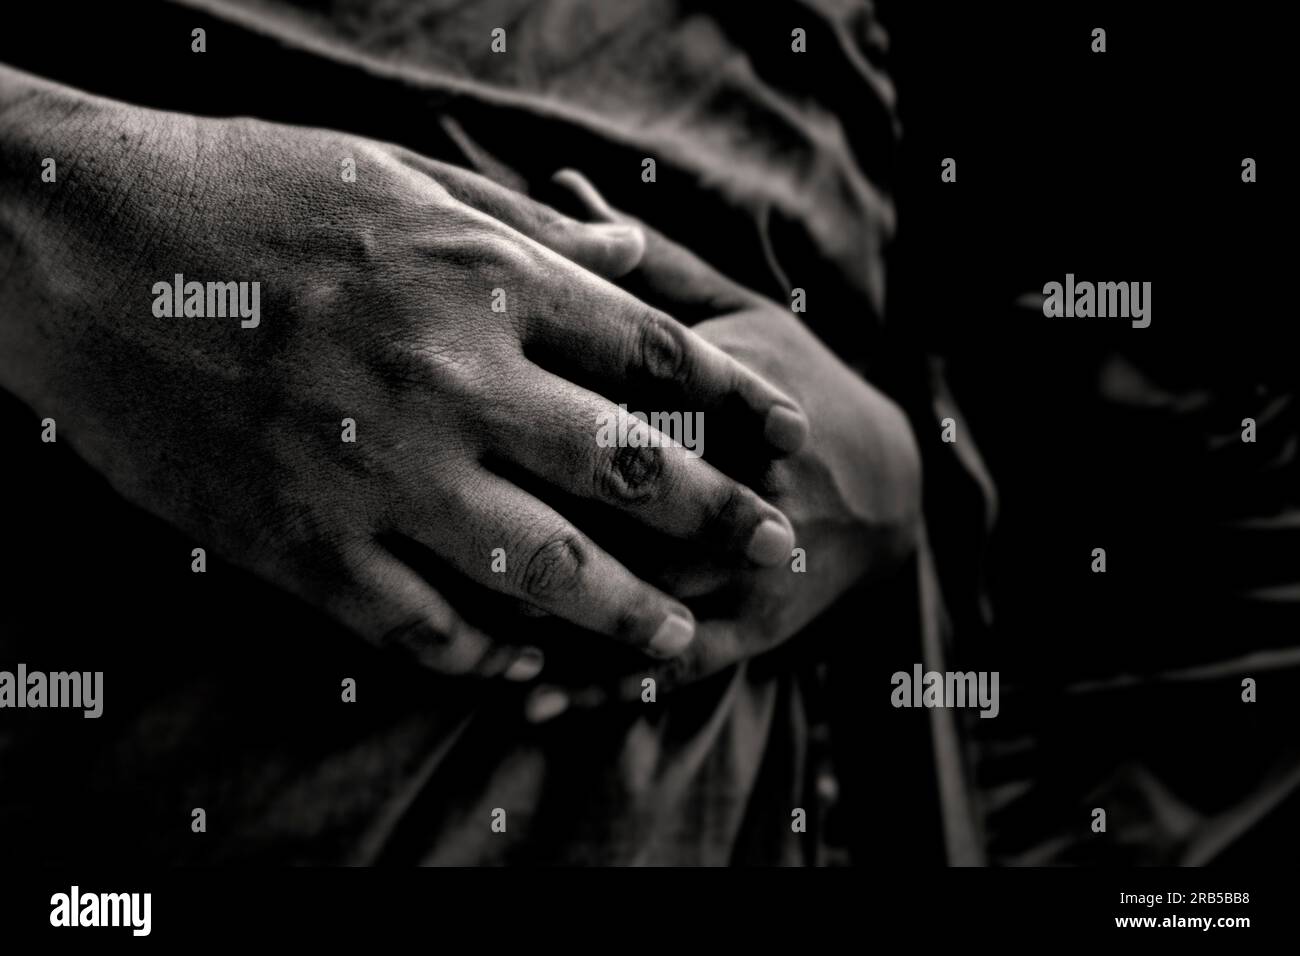 Hands. Asia Stock Photo